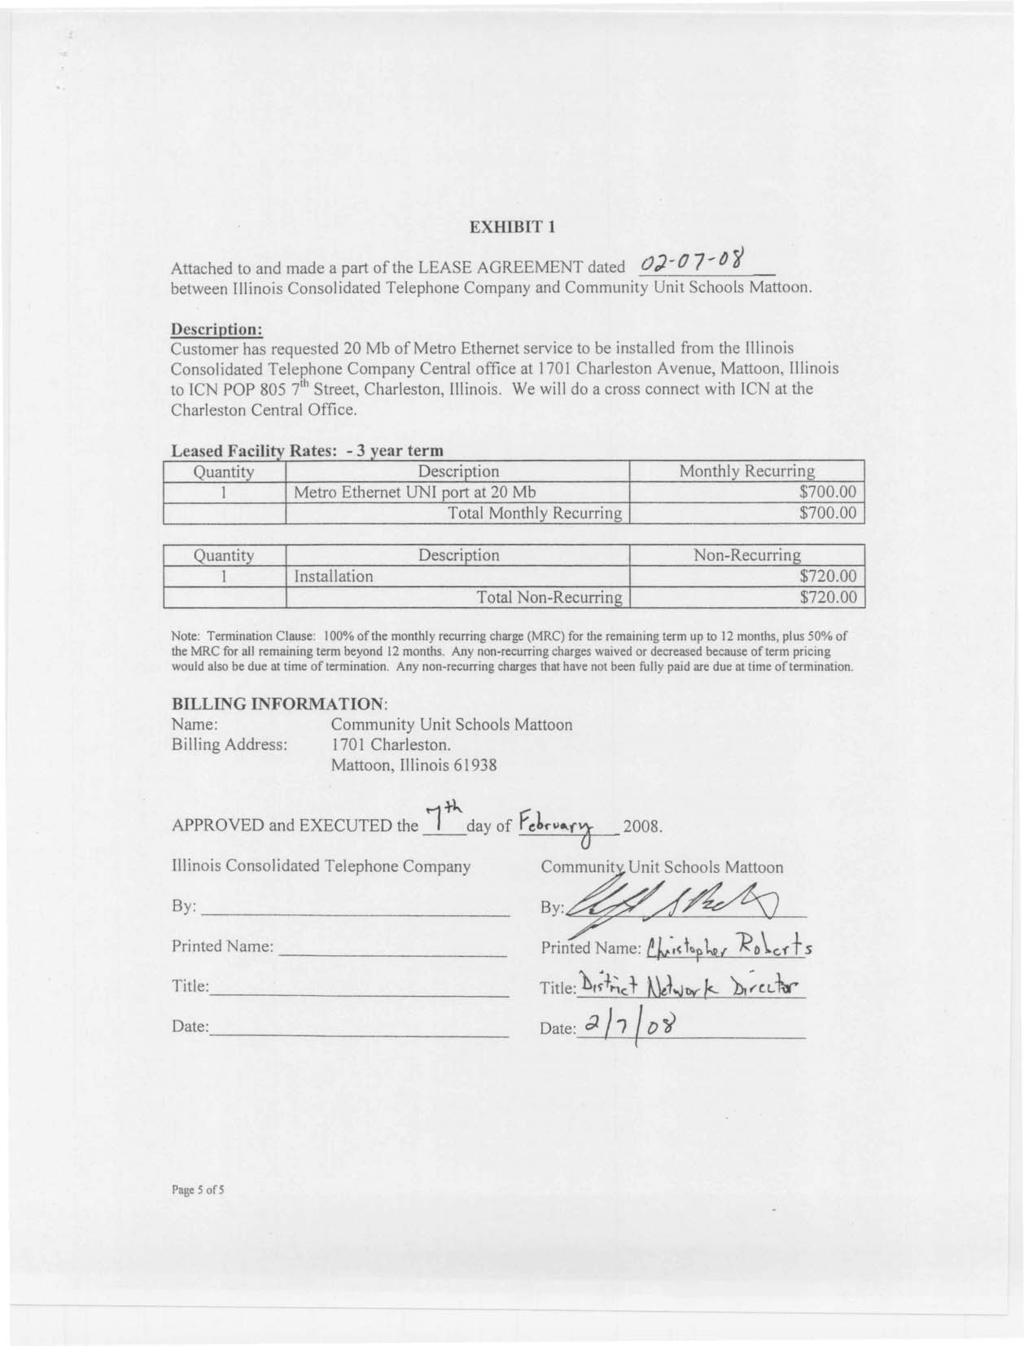 EXHIBIT 1 Attached to and made a part of the LEASE AGREEMENT dated (JJ-O 7- b ~ between Illinois Consolidated Telephone Company and Community Unit Schools Mattoon.